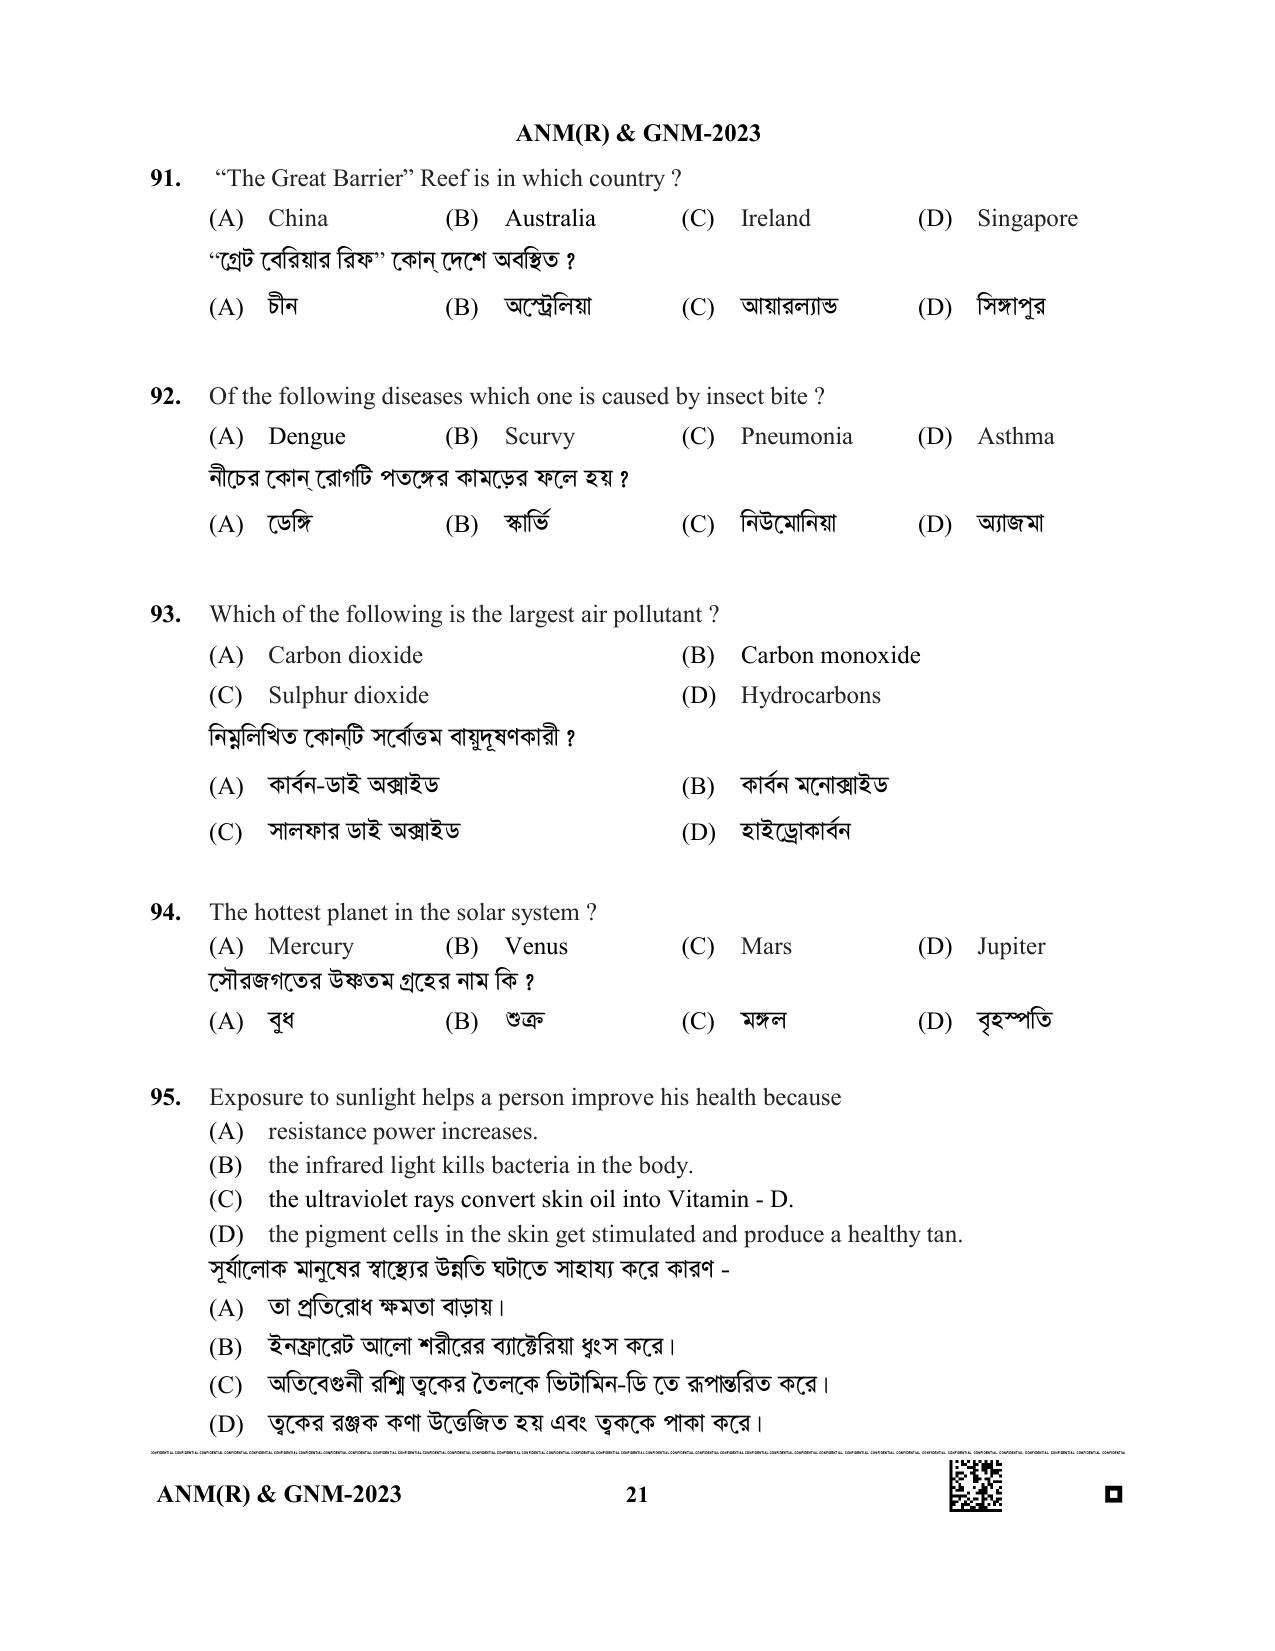 WB ANM GNM 2023 Question Paper - Page 21